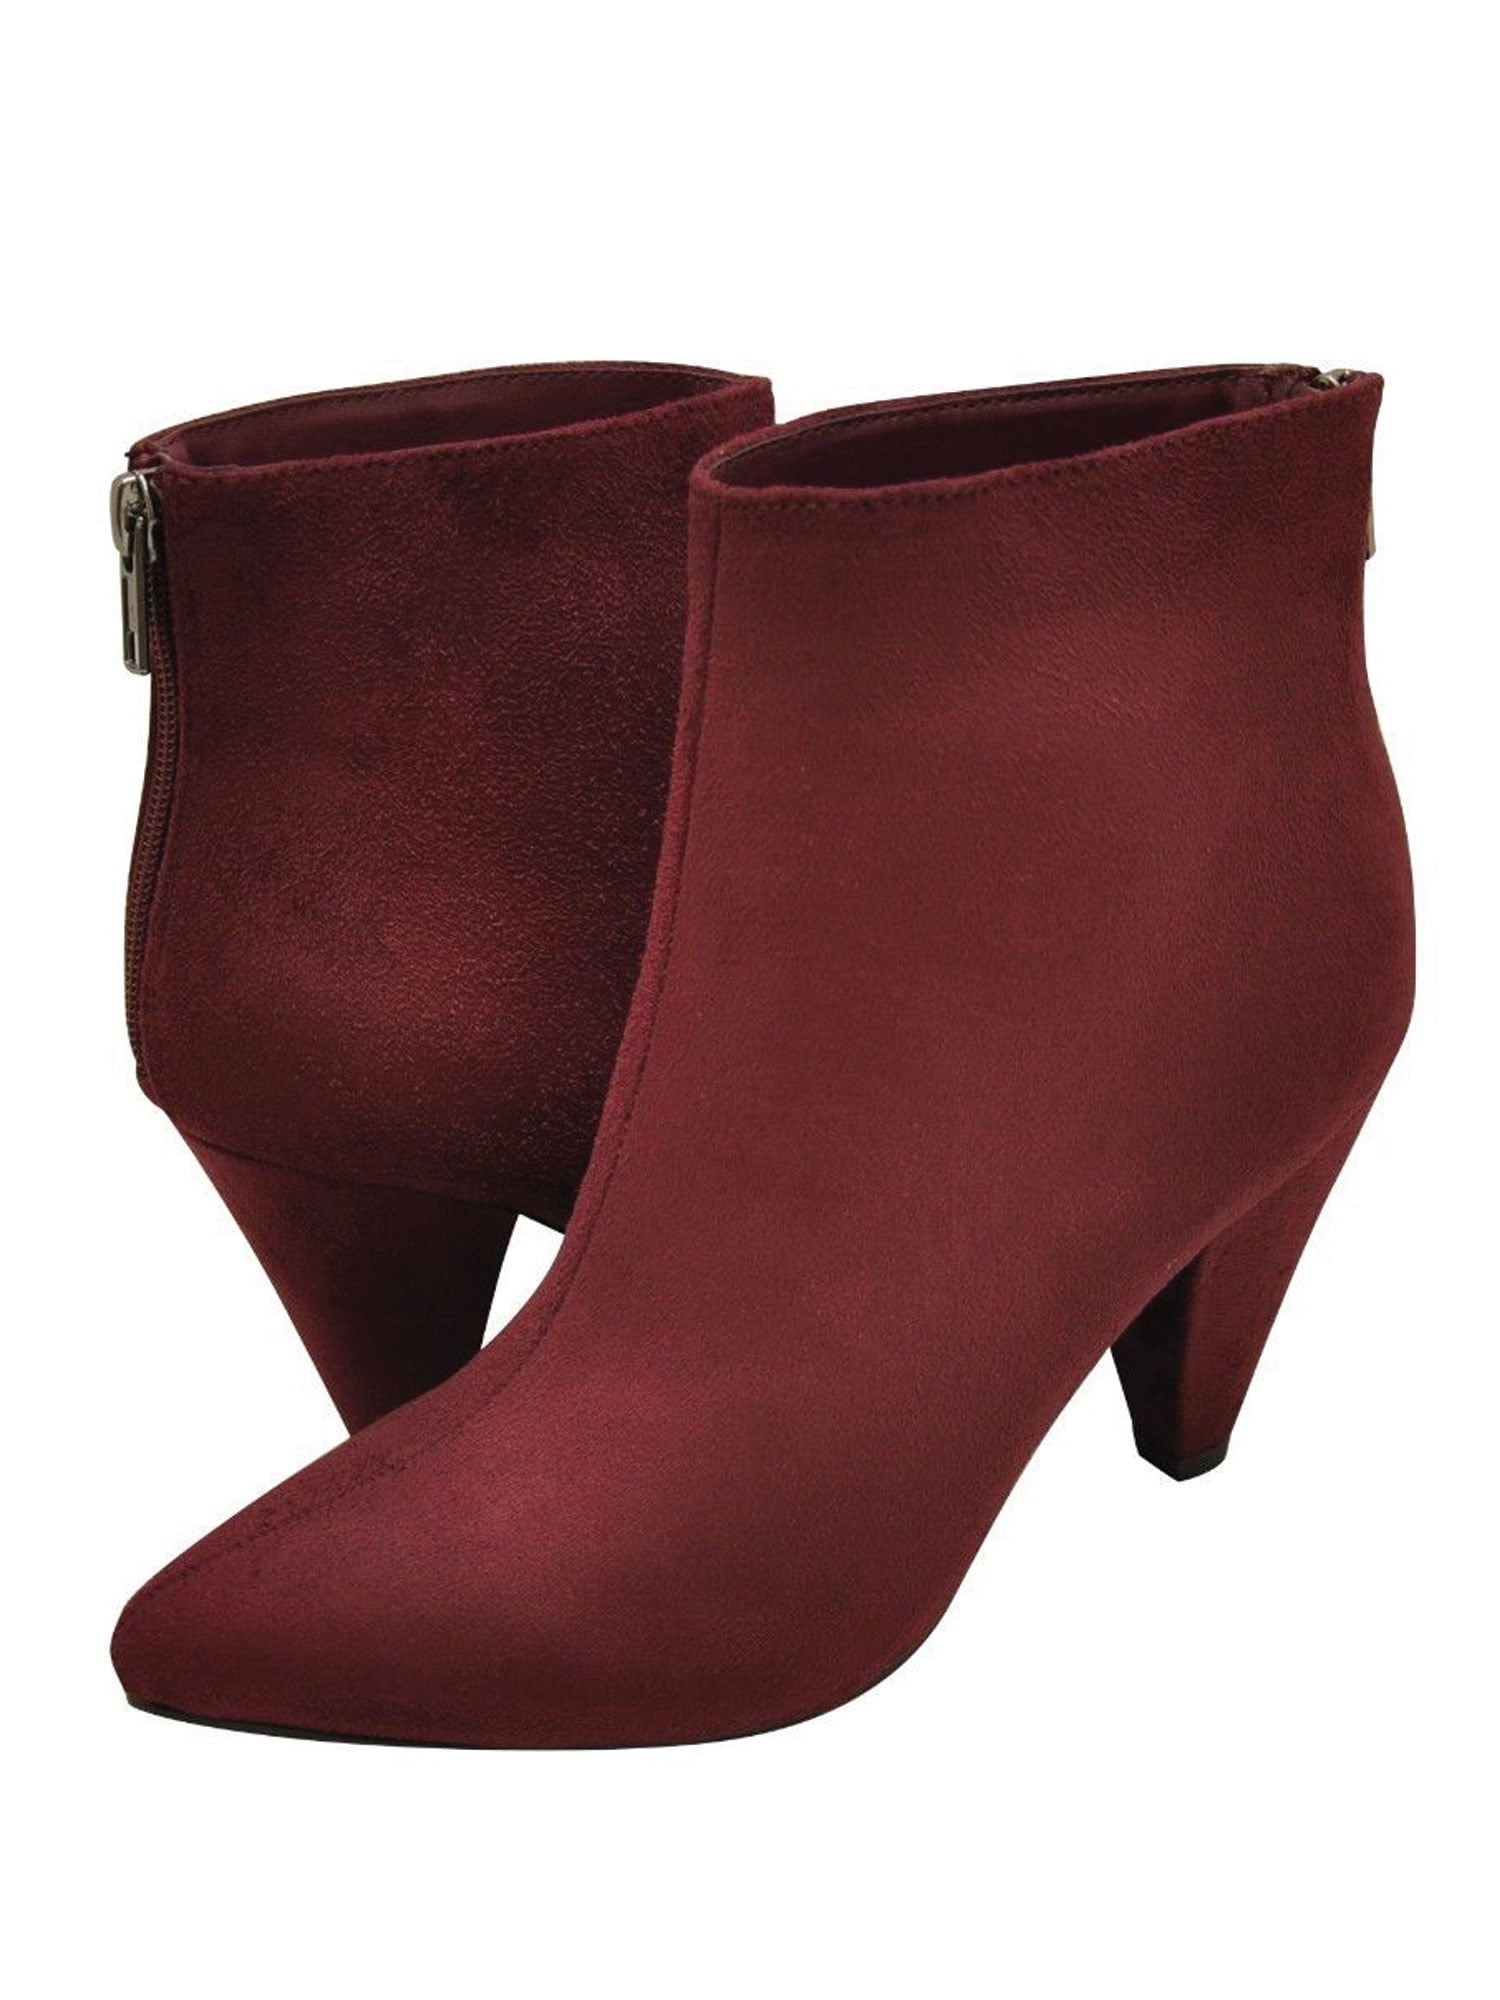 Women's Shoes Delicious THUNDER Ankle Heeled Suede Booties VINO *New* 